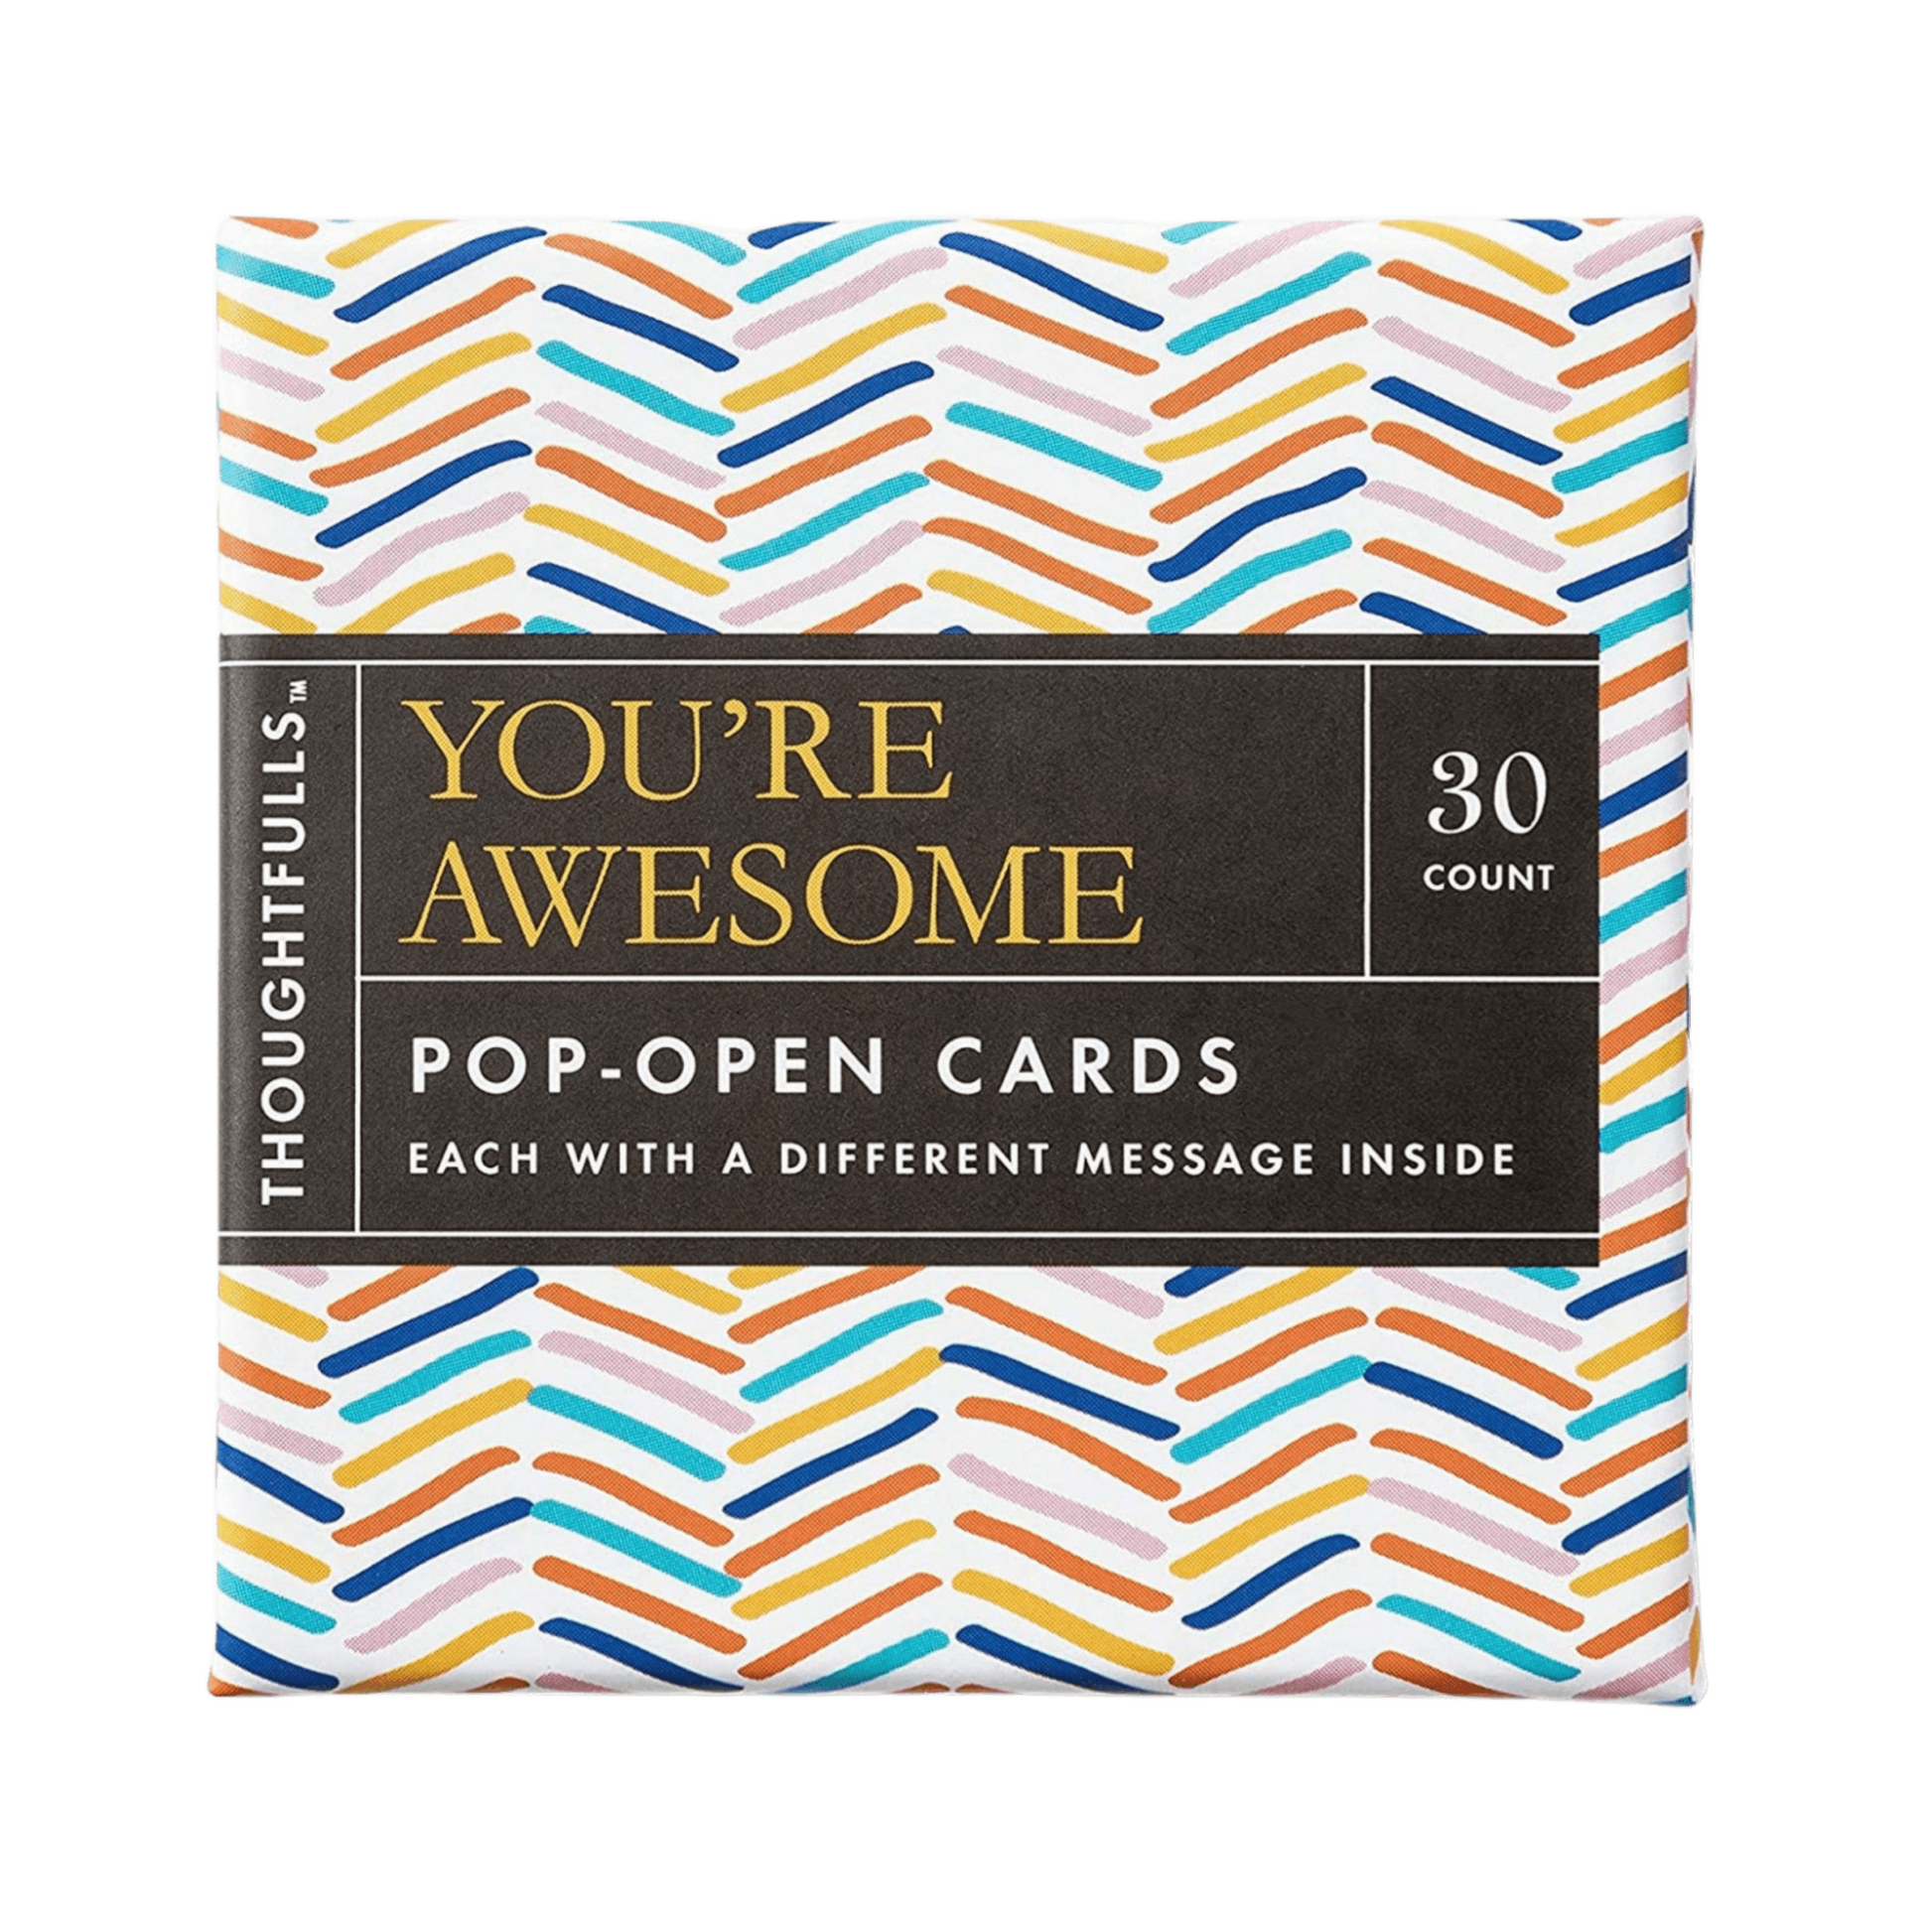 You're Awesome Pop-Open Cards